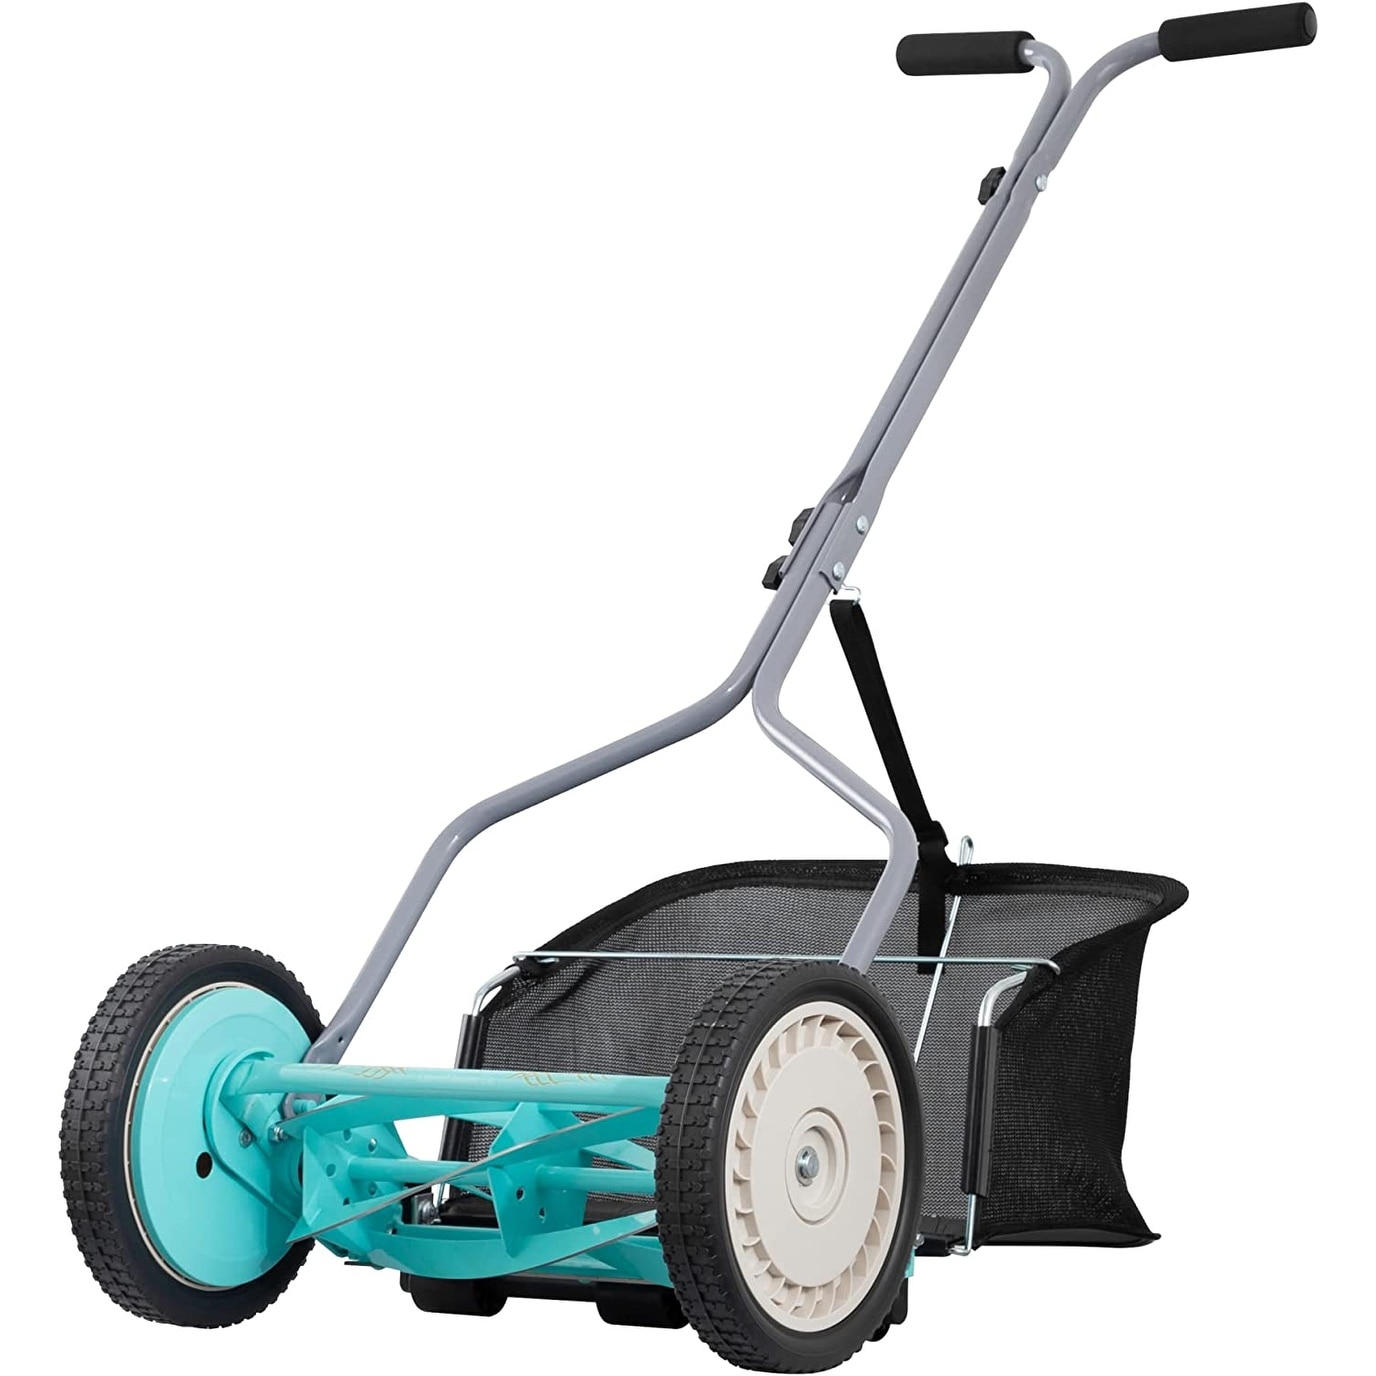 https://ak1.ostkcdn.com/images/products/is/images/direct/f433438c2315eebec84b2b4bf920647e8a0052a2/American-Lawn-Mower-Company-1304-14GC-Reel-Lawn-Mower%2C-Mint.jpg